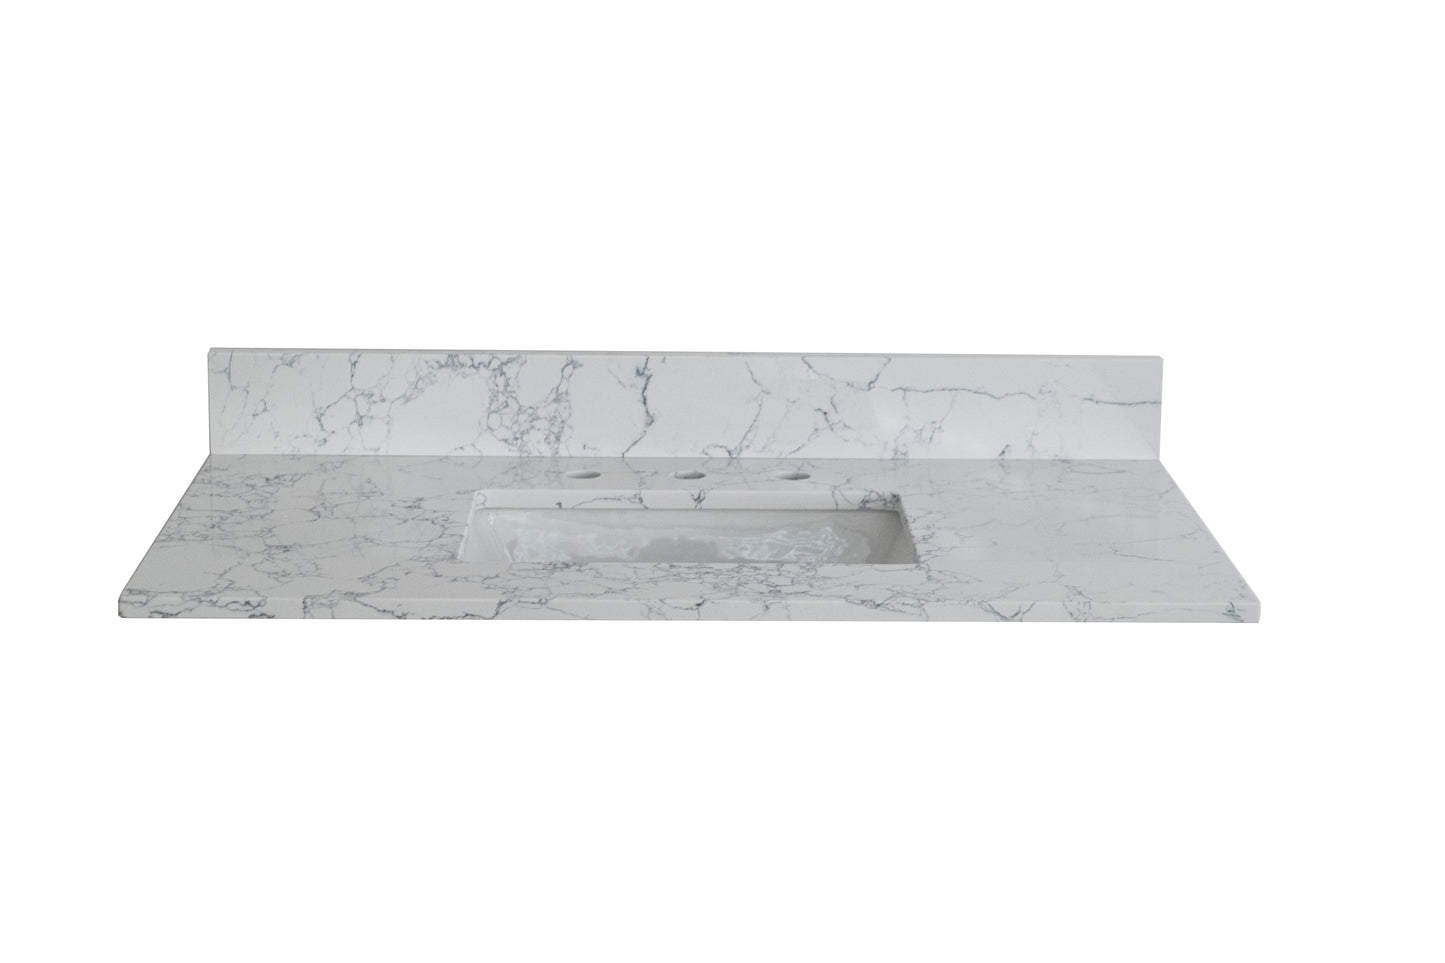 Montary 43"x 22" bathroom stone vanity top carrara jade  engineered marble color with undermount ceramic sink and 3 faucet hole with backsplash